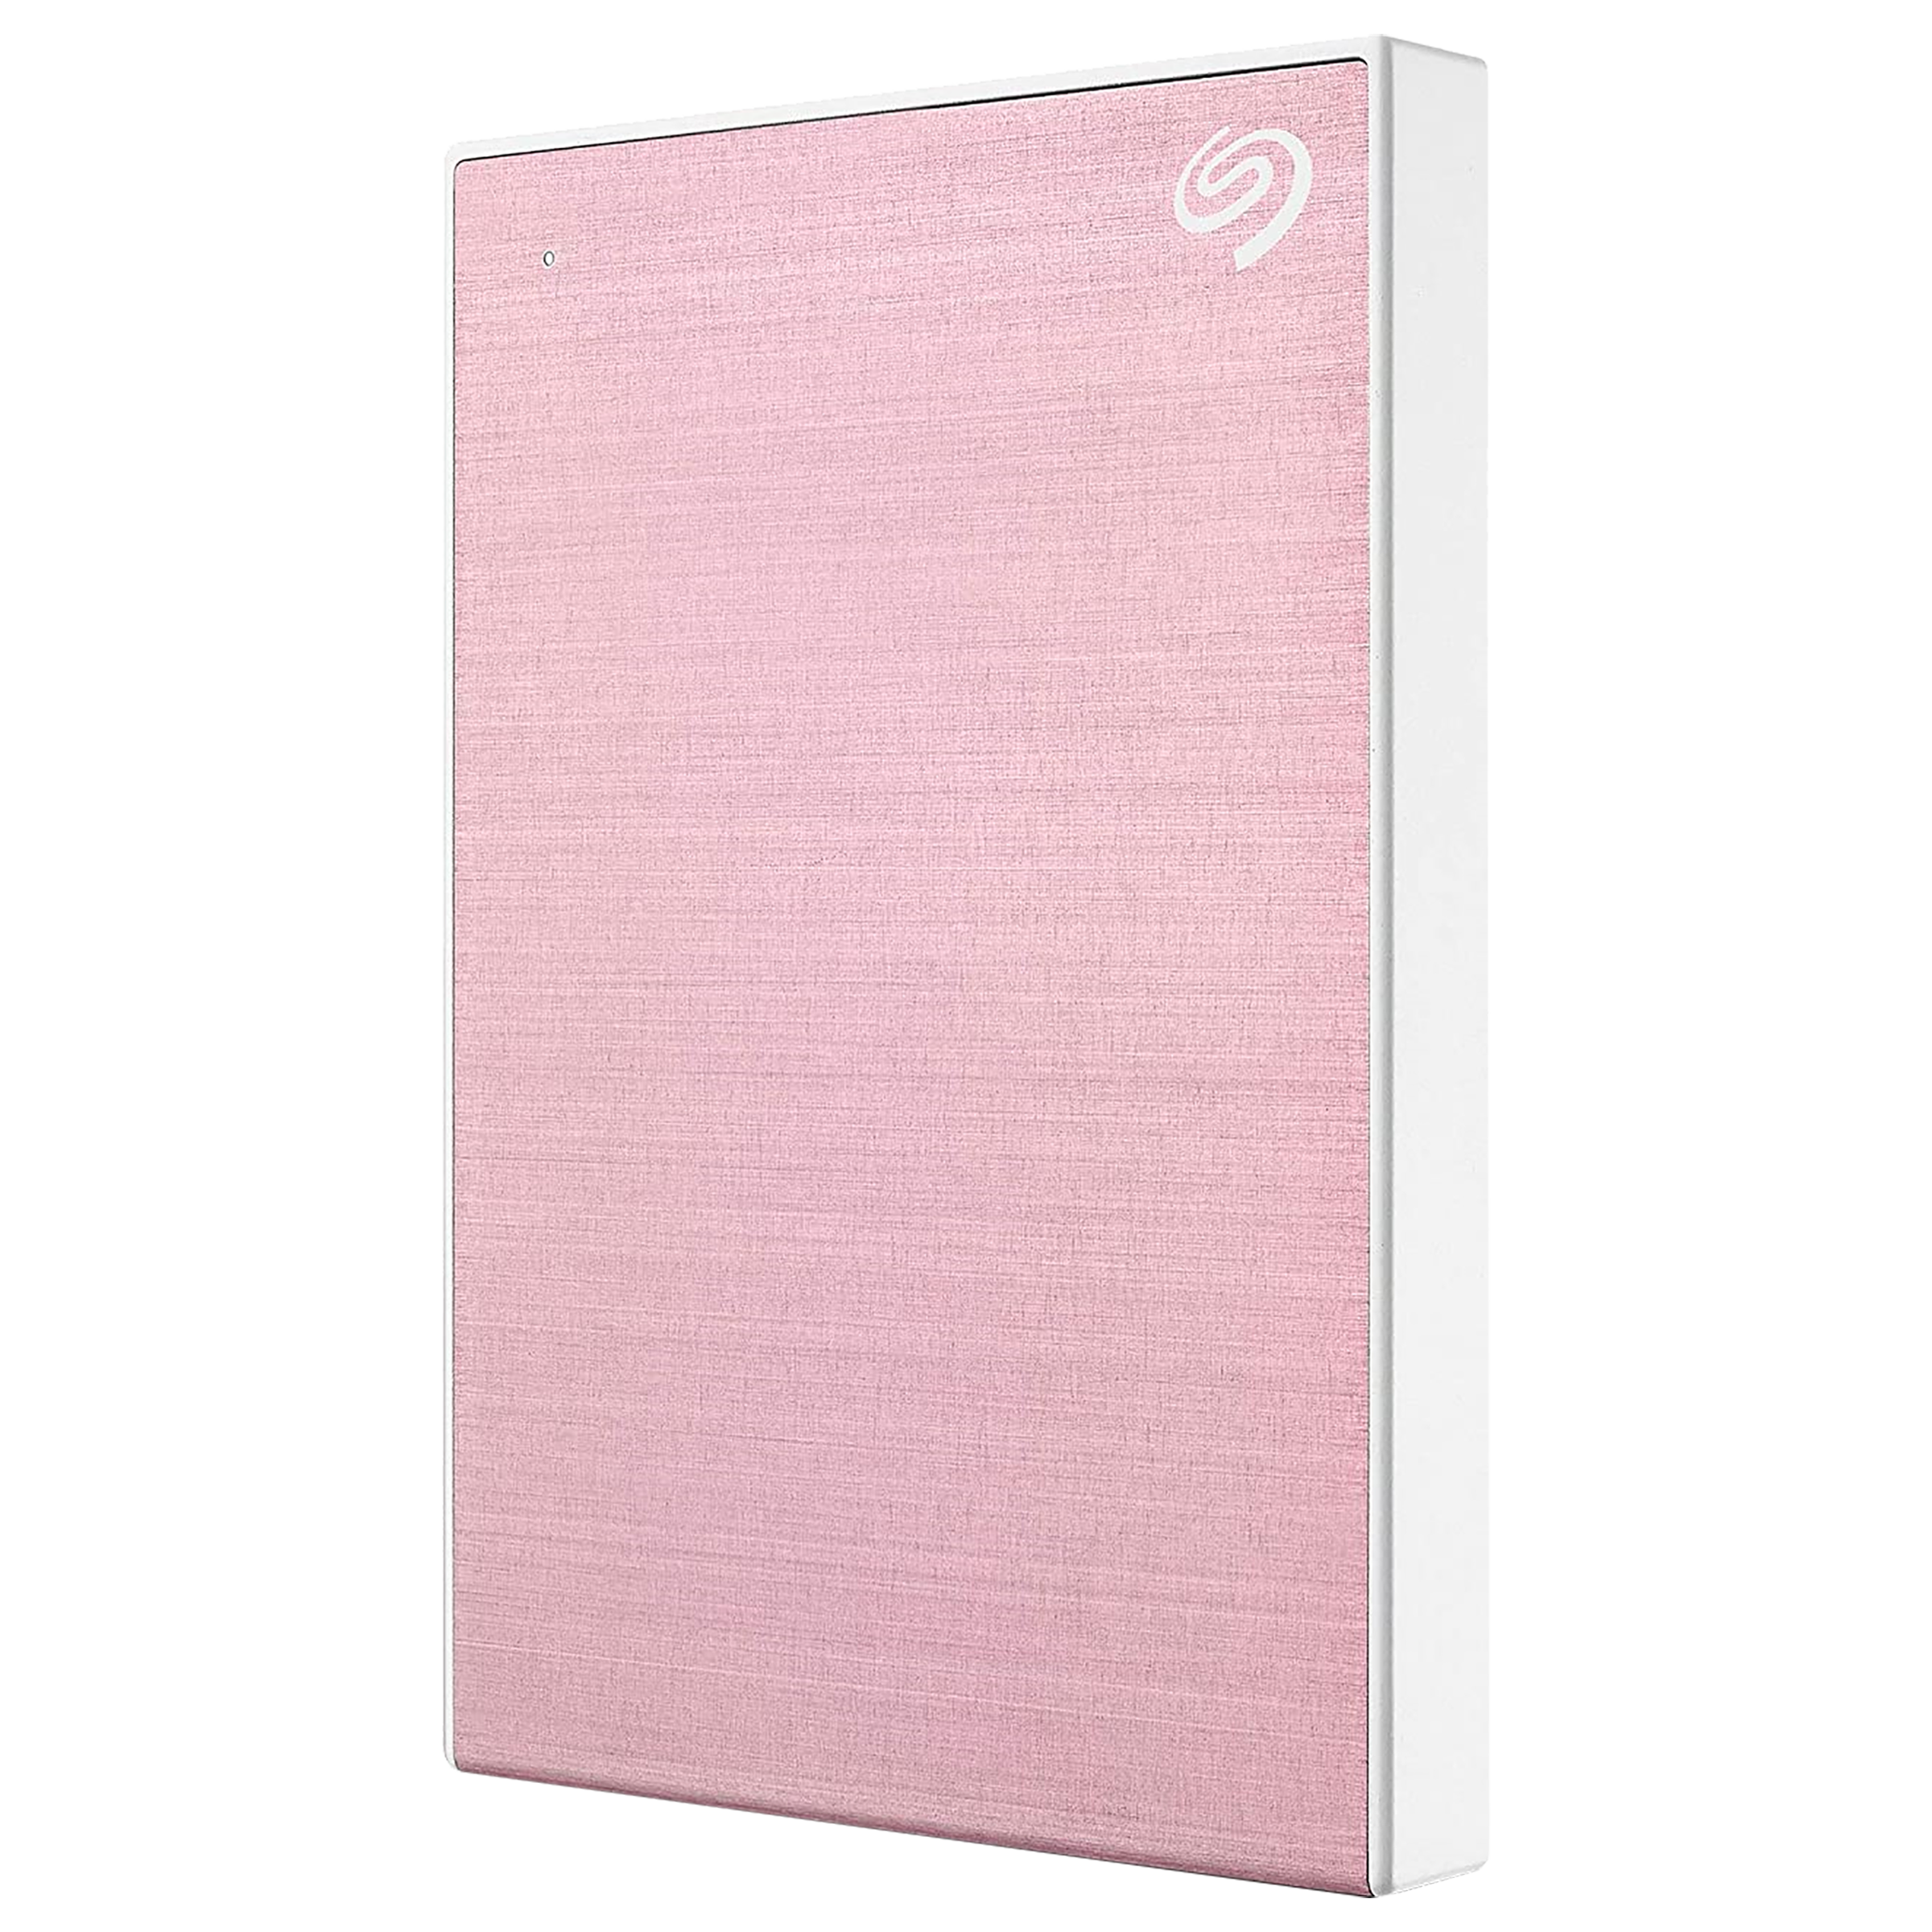 Seagate One Touch 2TB USB 3.0 Hard Disk Drive (Mac And Windows Compatible, STKY2000405, Pink)